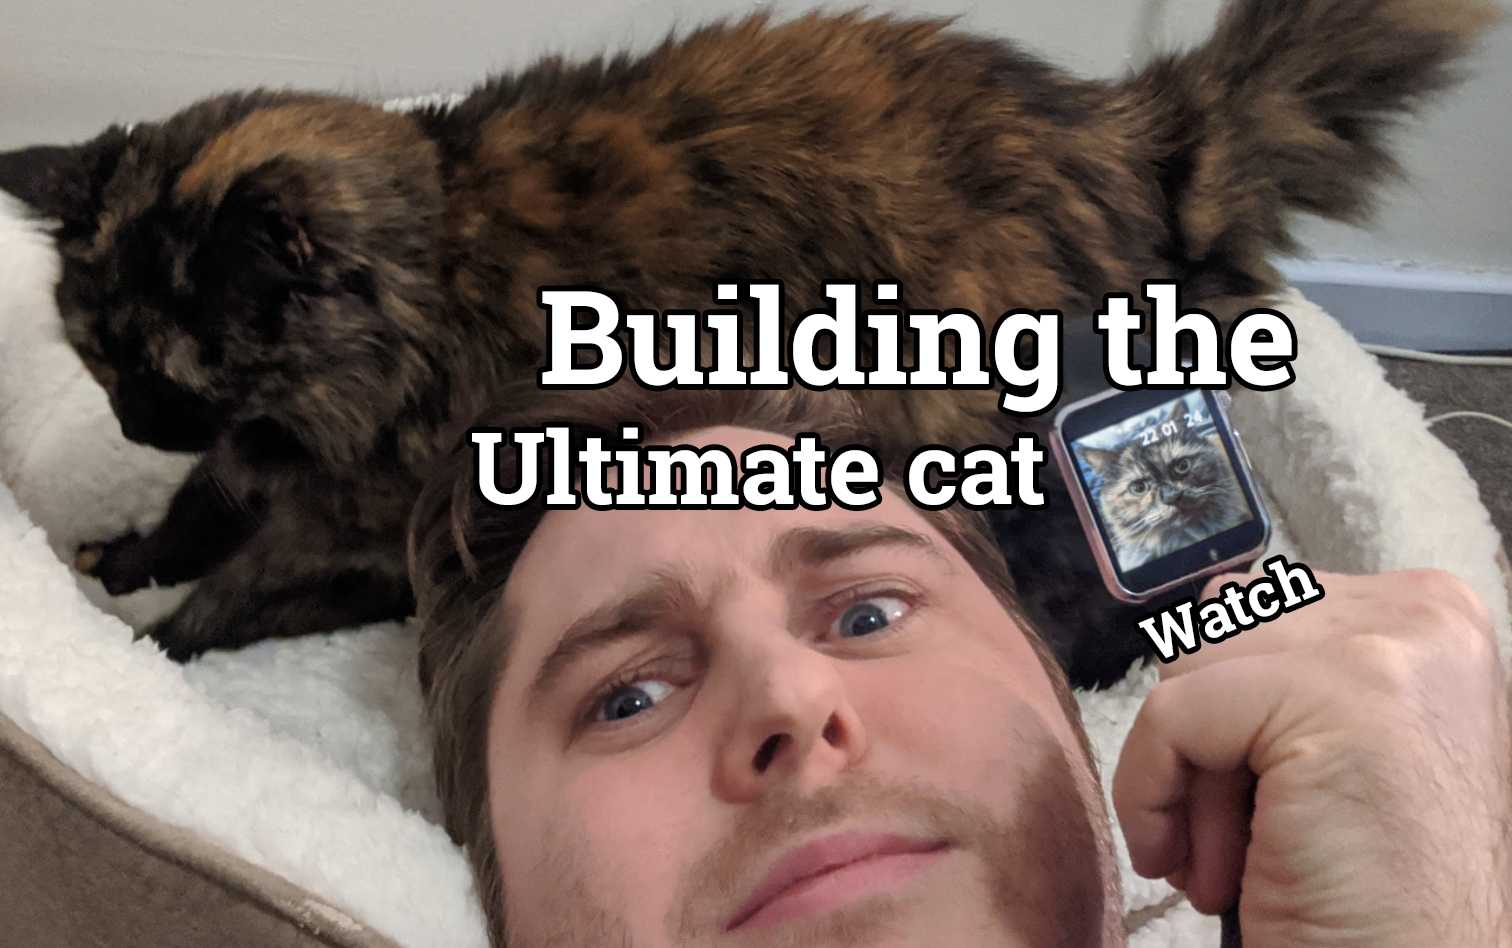 Building the ultimate cat watch